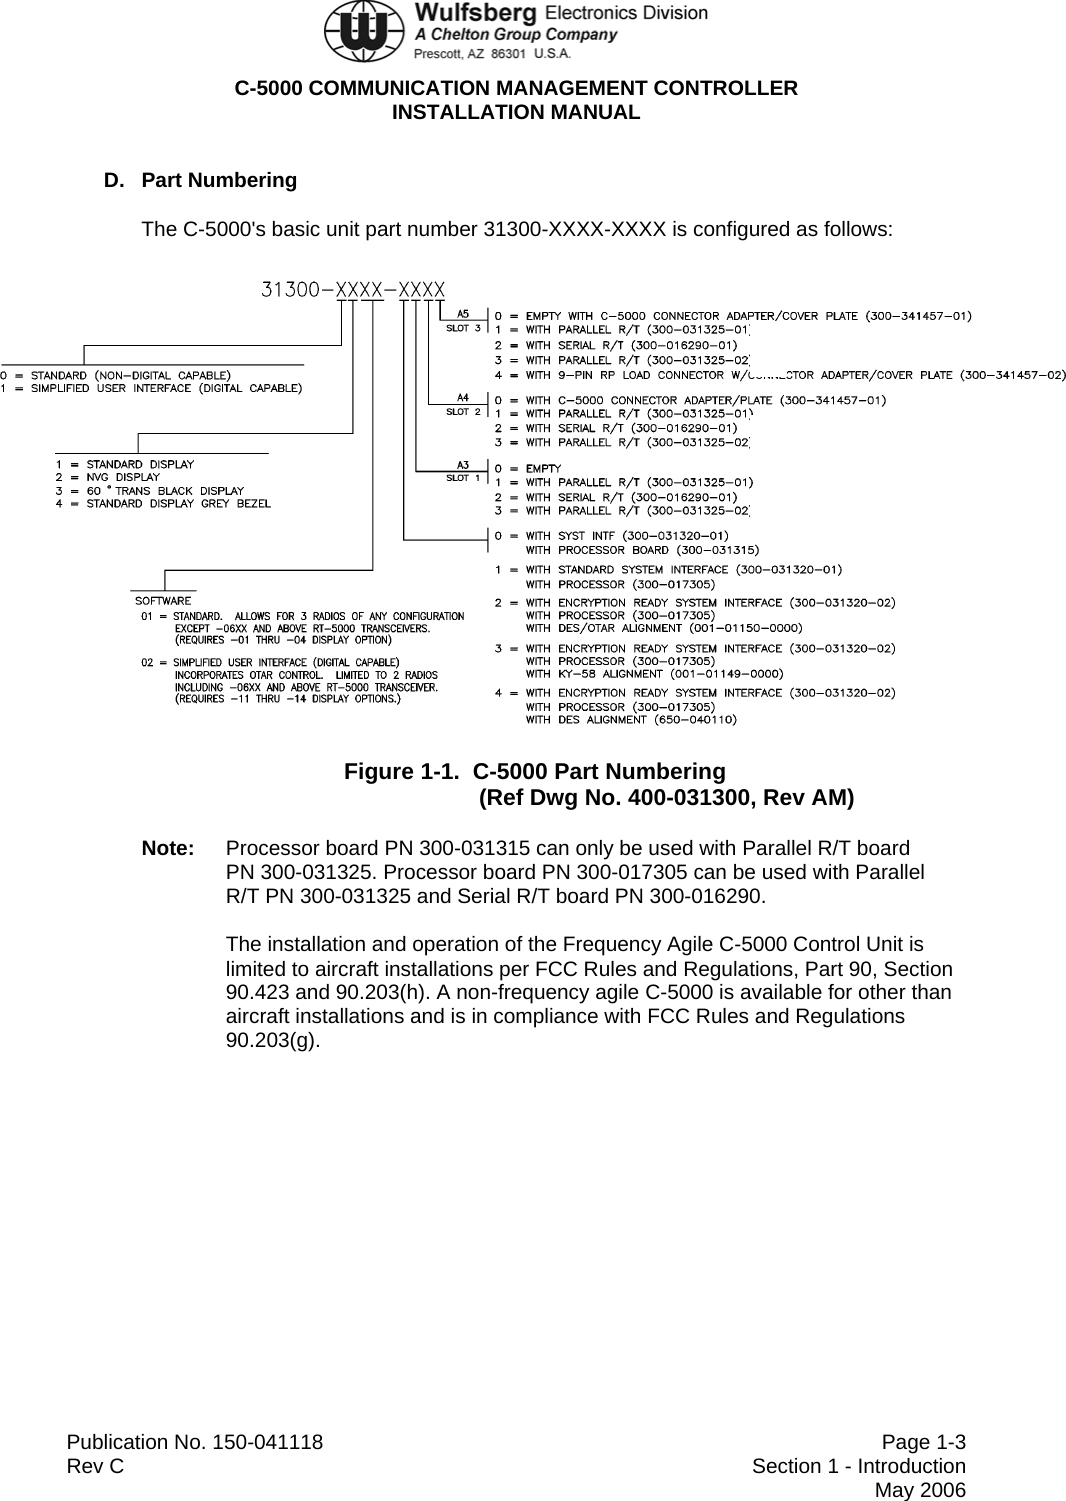  C-5000 COMMUNICATION MANAGEMENT CONTROLLER INSTALLATION MANUAL  Publication No. 150-041118  Page 1-3 Rev C  Section 1 - Introduction  May 2006 D. Part Numbering The C-5000&apos;s basic unit part number 31300-XXXX-XXXX is configured as follows:  Figure 1-1.  C-5000 Part Numbering (Ref Dwg No. 400-031300, Rev AM) Note:  Processor board PN 300-031315 can only be used with Parallel R/T board  PN 300-031325. Processor board PN 300-017305 can be used with Parallel  R/T PN 300-031325 and Serial R/T board PN 300-016290. The installation and operation of the Frequency Agile C-5000 Control Unit is limited to aircraft installations per FCC Rules and Regulations, Part 90, Section 90.423 and 90.203(h). A non-frequency agile C-5000 is available for other than aircraft installations and is in compliance with FCC Rules and Regulations 90.203(g). 